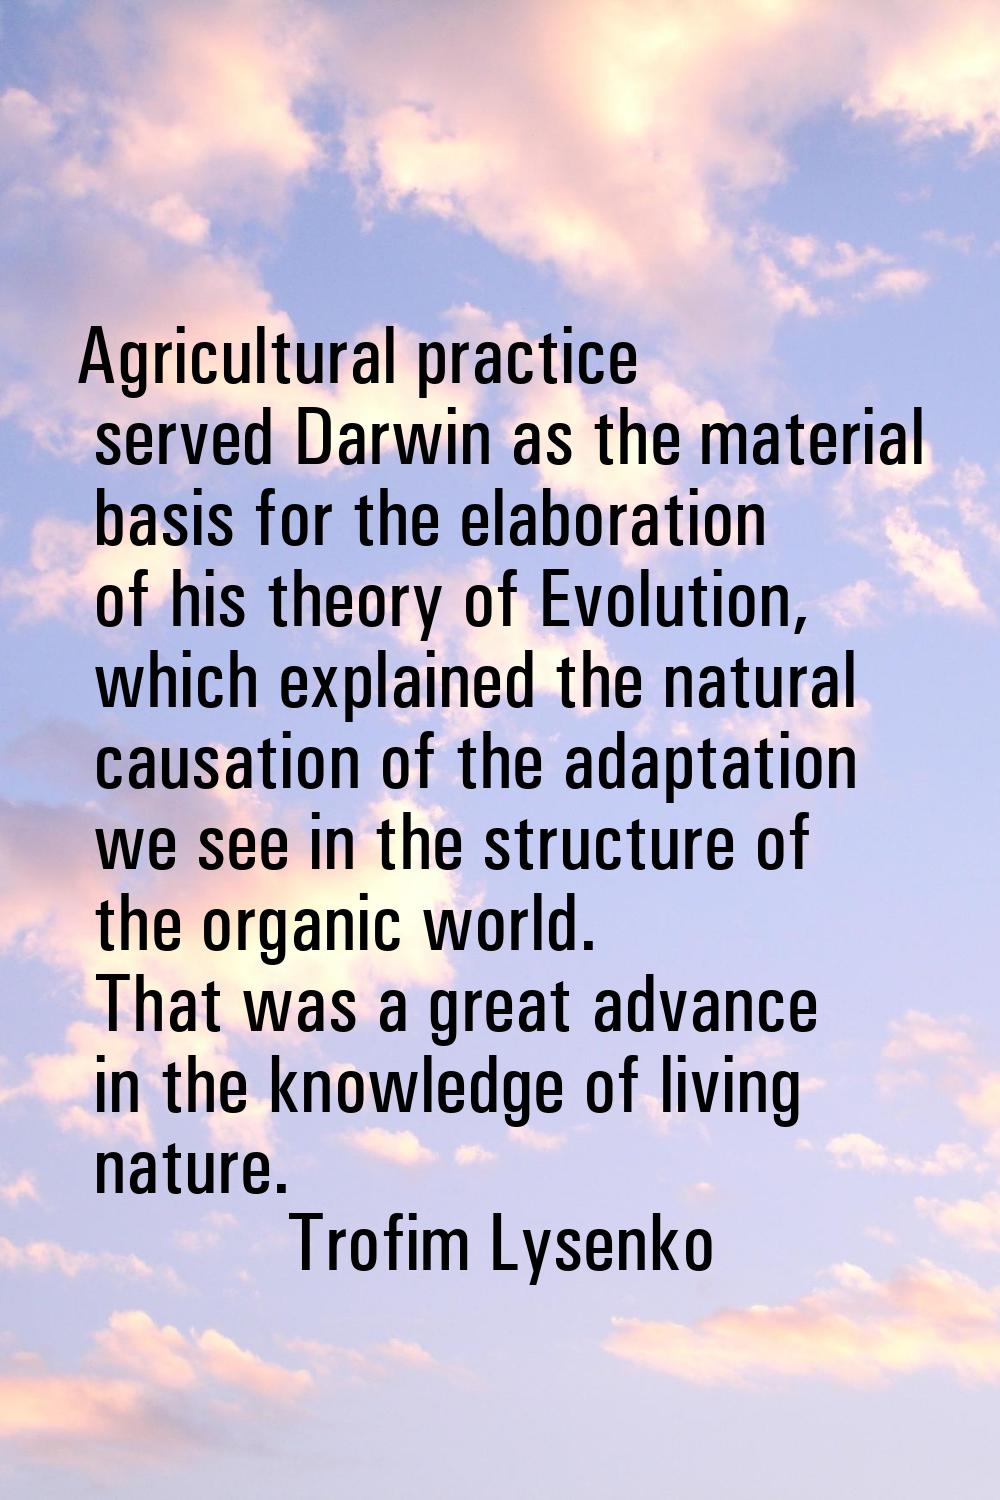 Agricultural practice served Darwin as the material basis for the elaboration of his theory of Evol